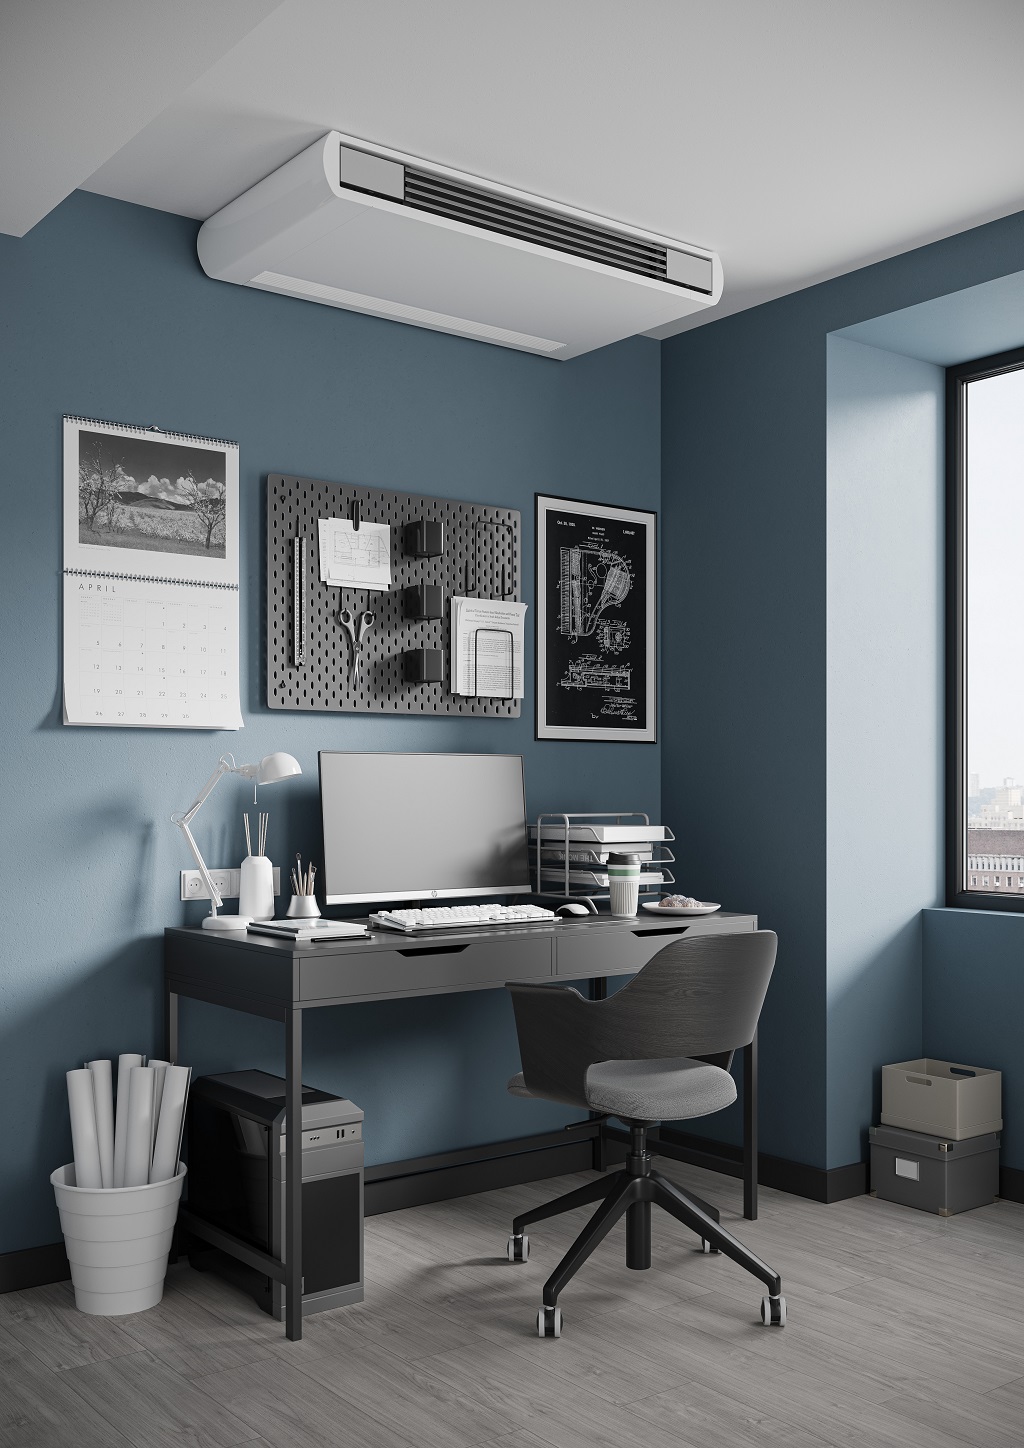 iVector_S2_ceiling_mounted_study_room_cam2_final.jpg